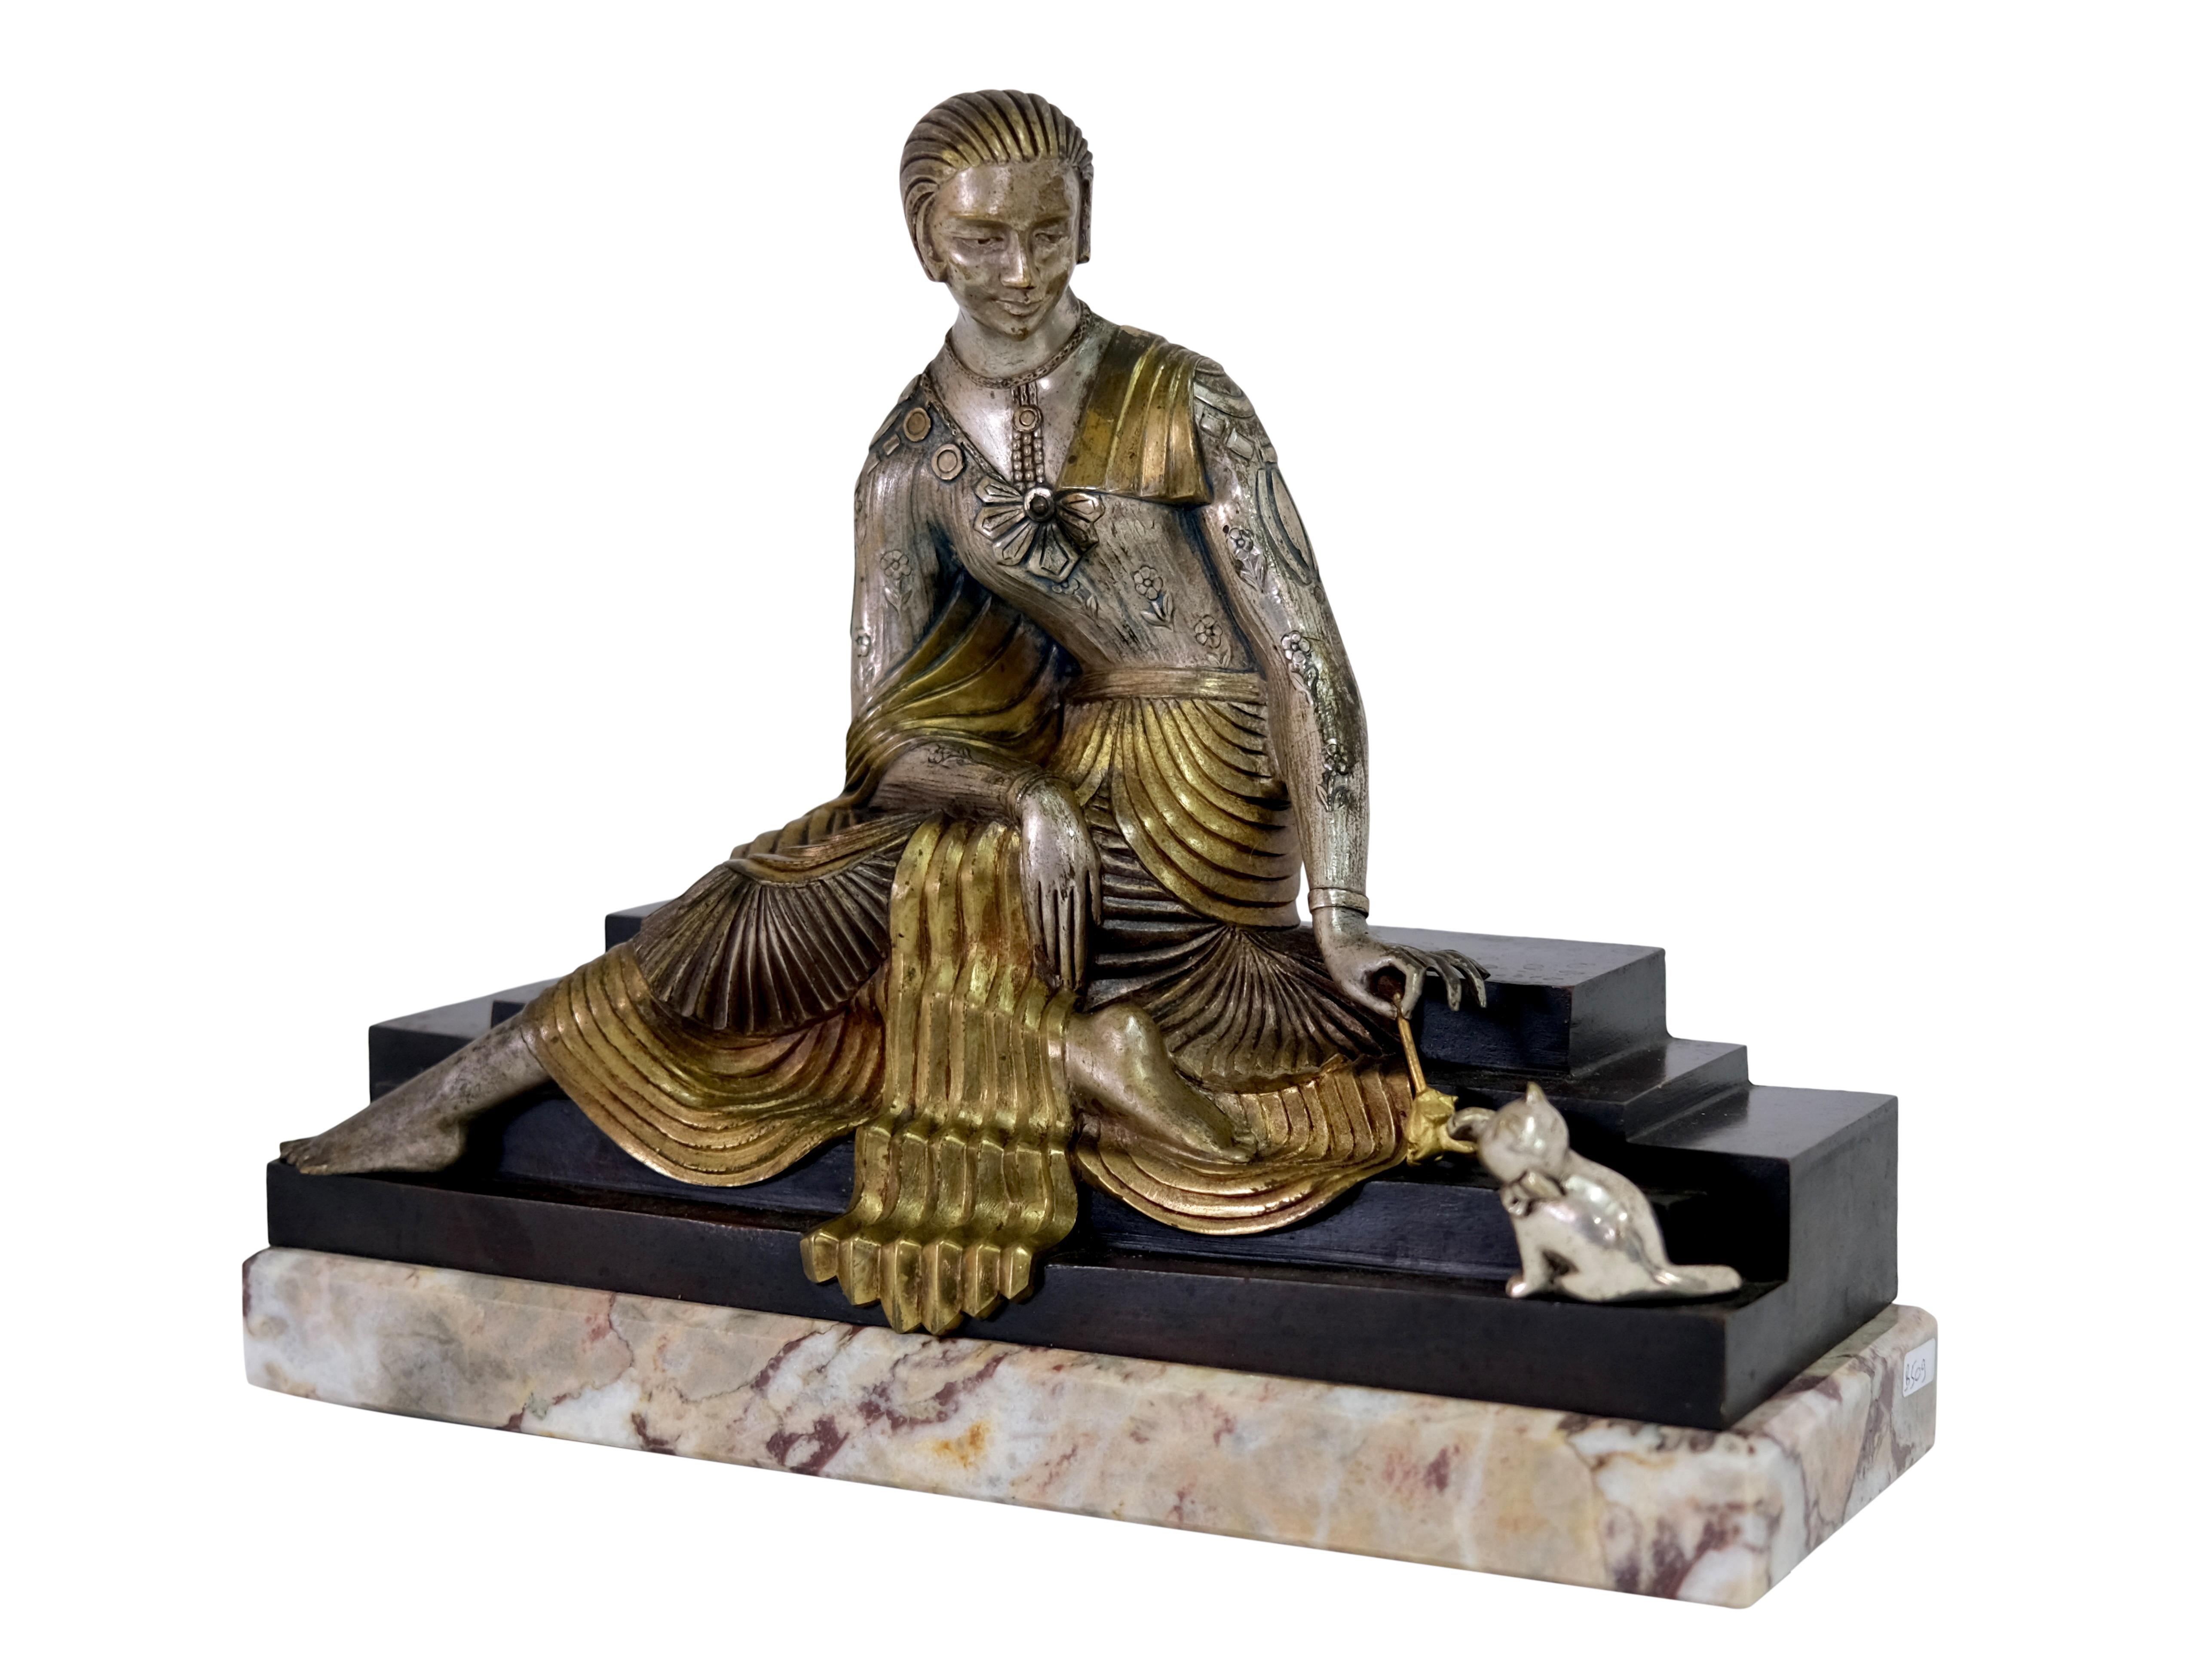 Sculpture, attributed to Georges Lavroff
Lady with kitten

Bronze with original patina and partial gilding
Stepped plinth

Original Art Deco, France 1930s

Dimensions:
Width: 31,5 cm
Height: 26 cm
Depth: 10,5 cm.